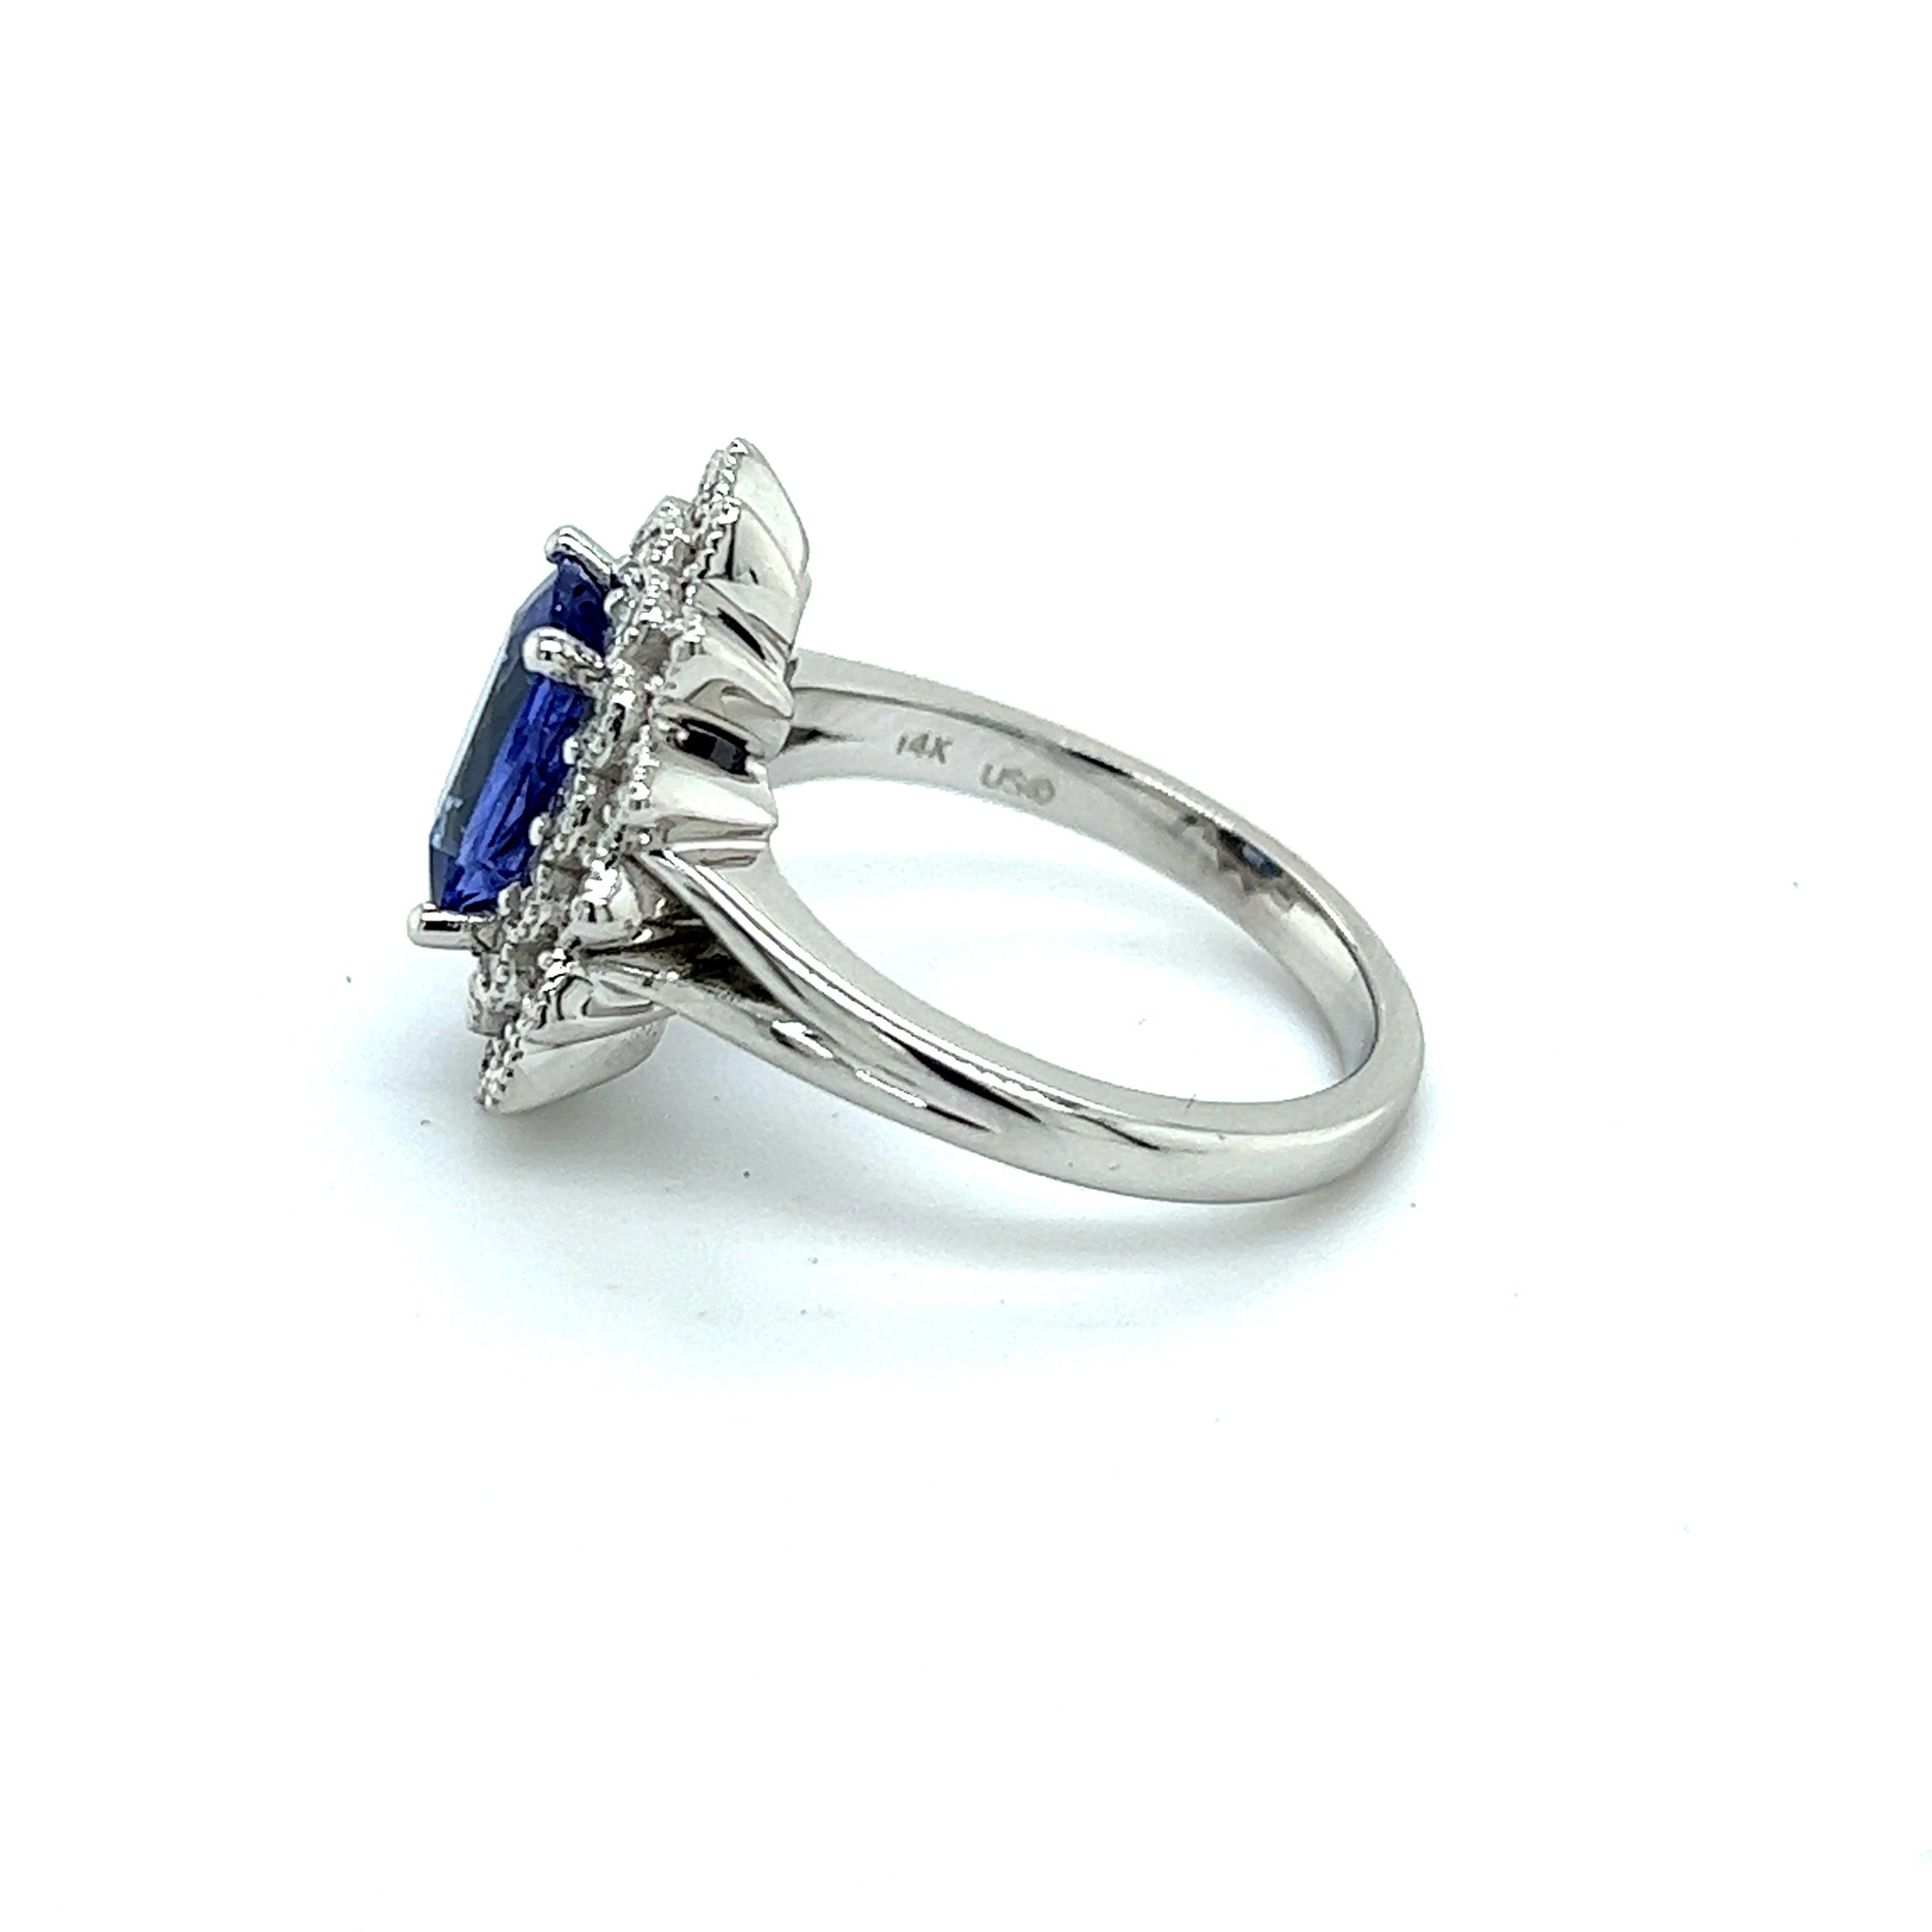 Natural Tanzanite Diamond Ring 6.5 14k W Gold 2.61 TCW Certified For Sale 9